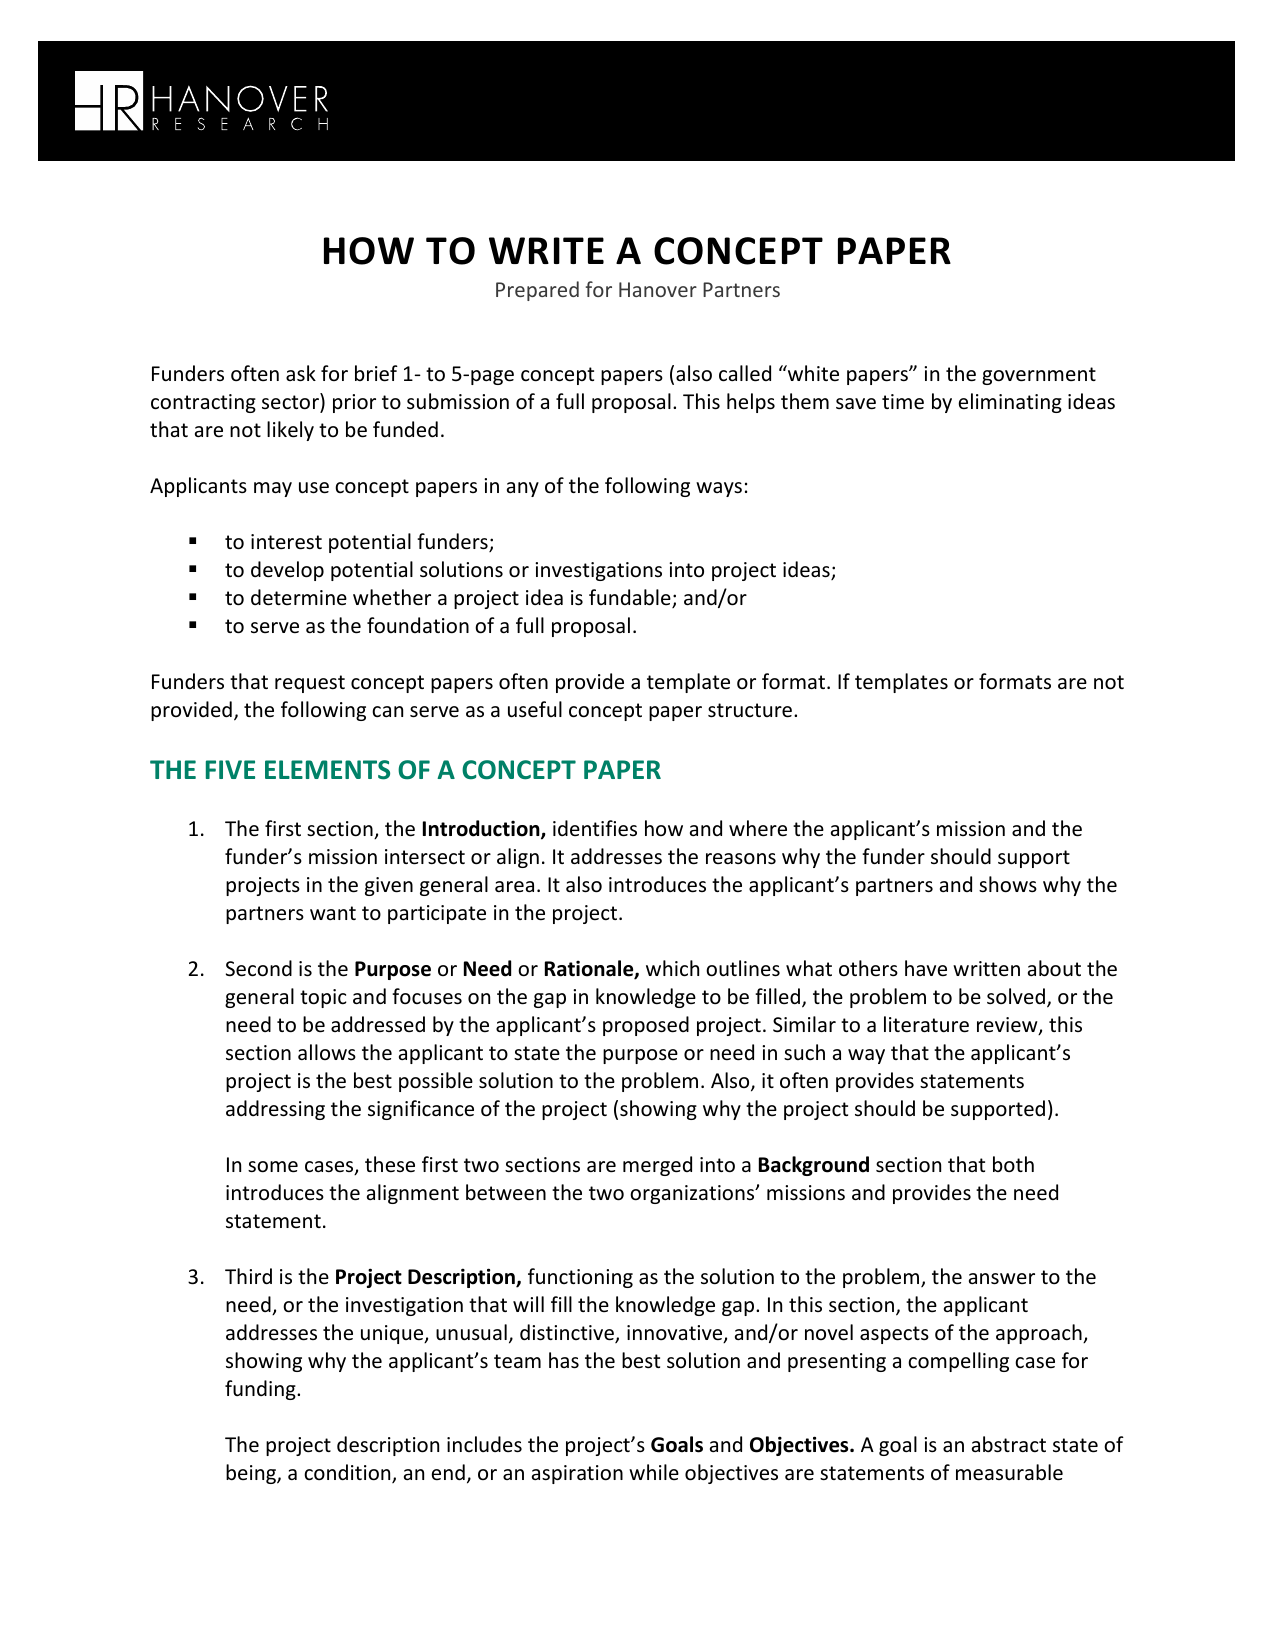 example of concept paper support